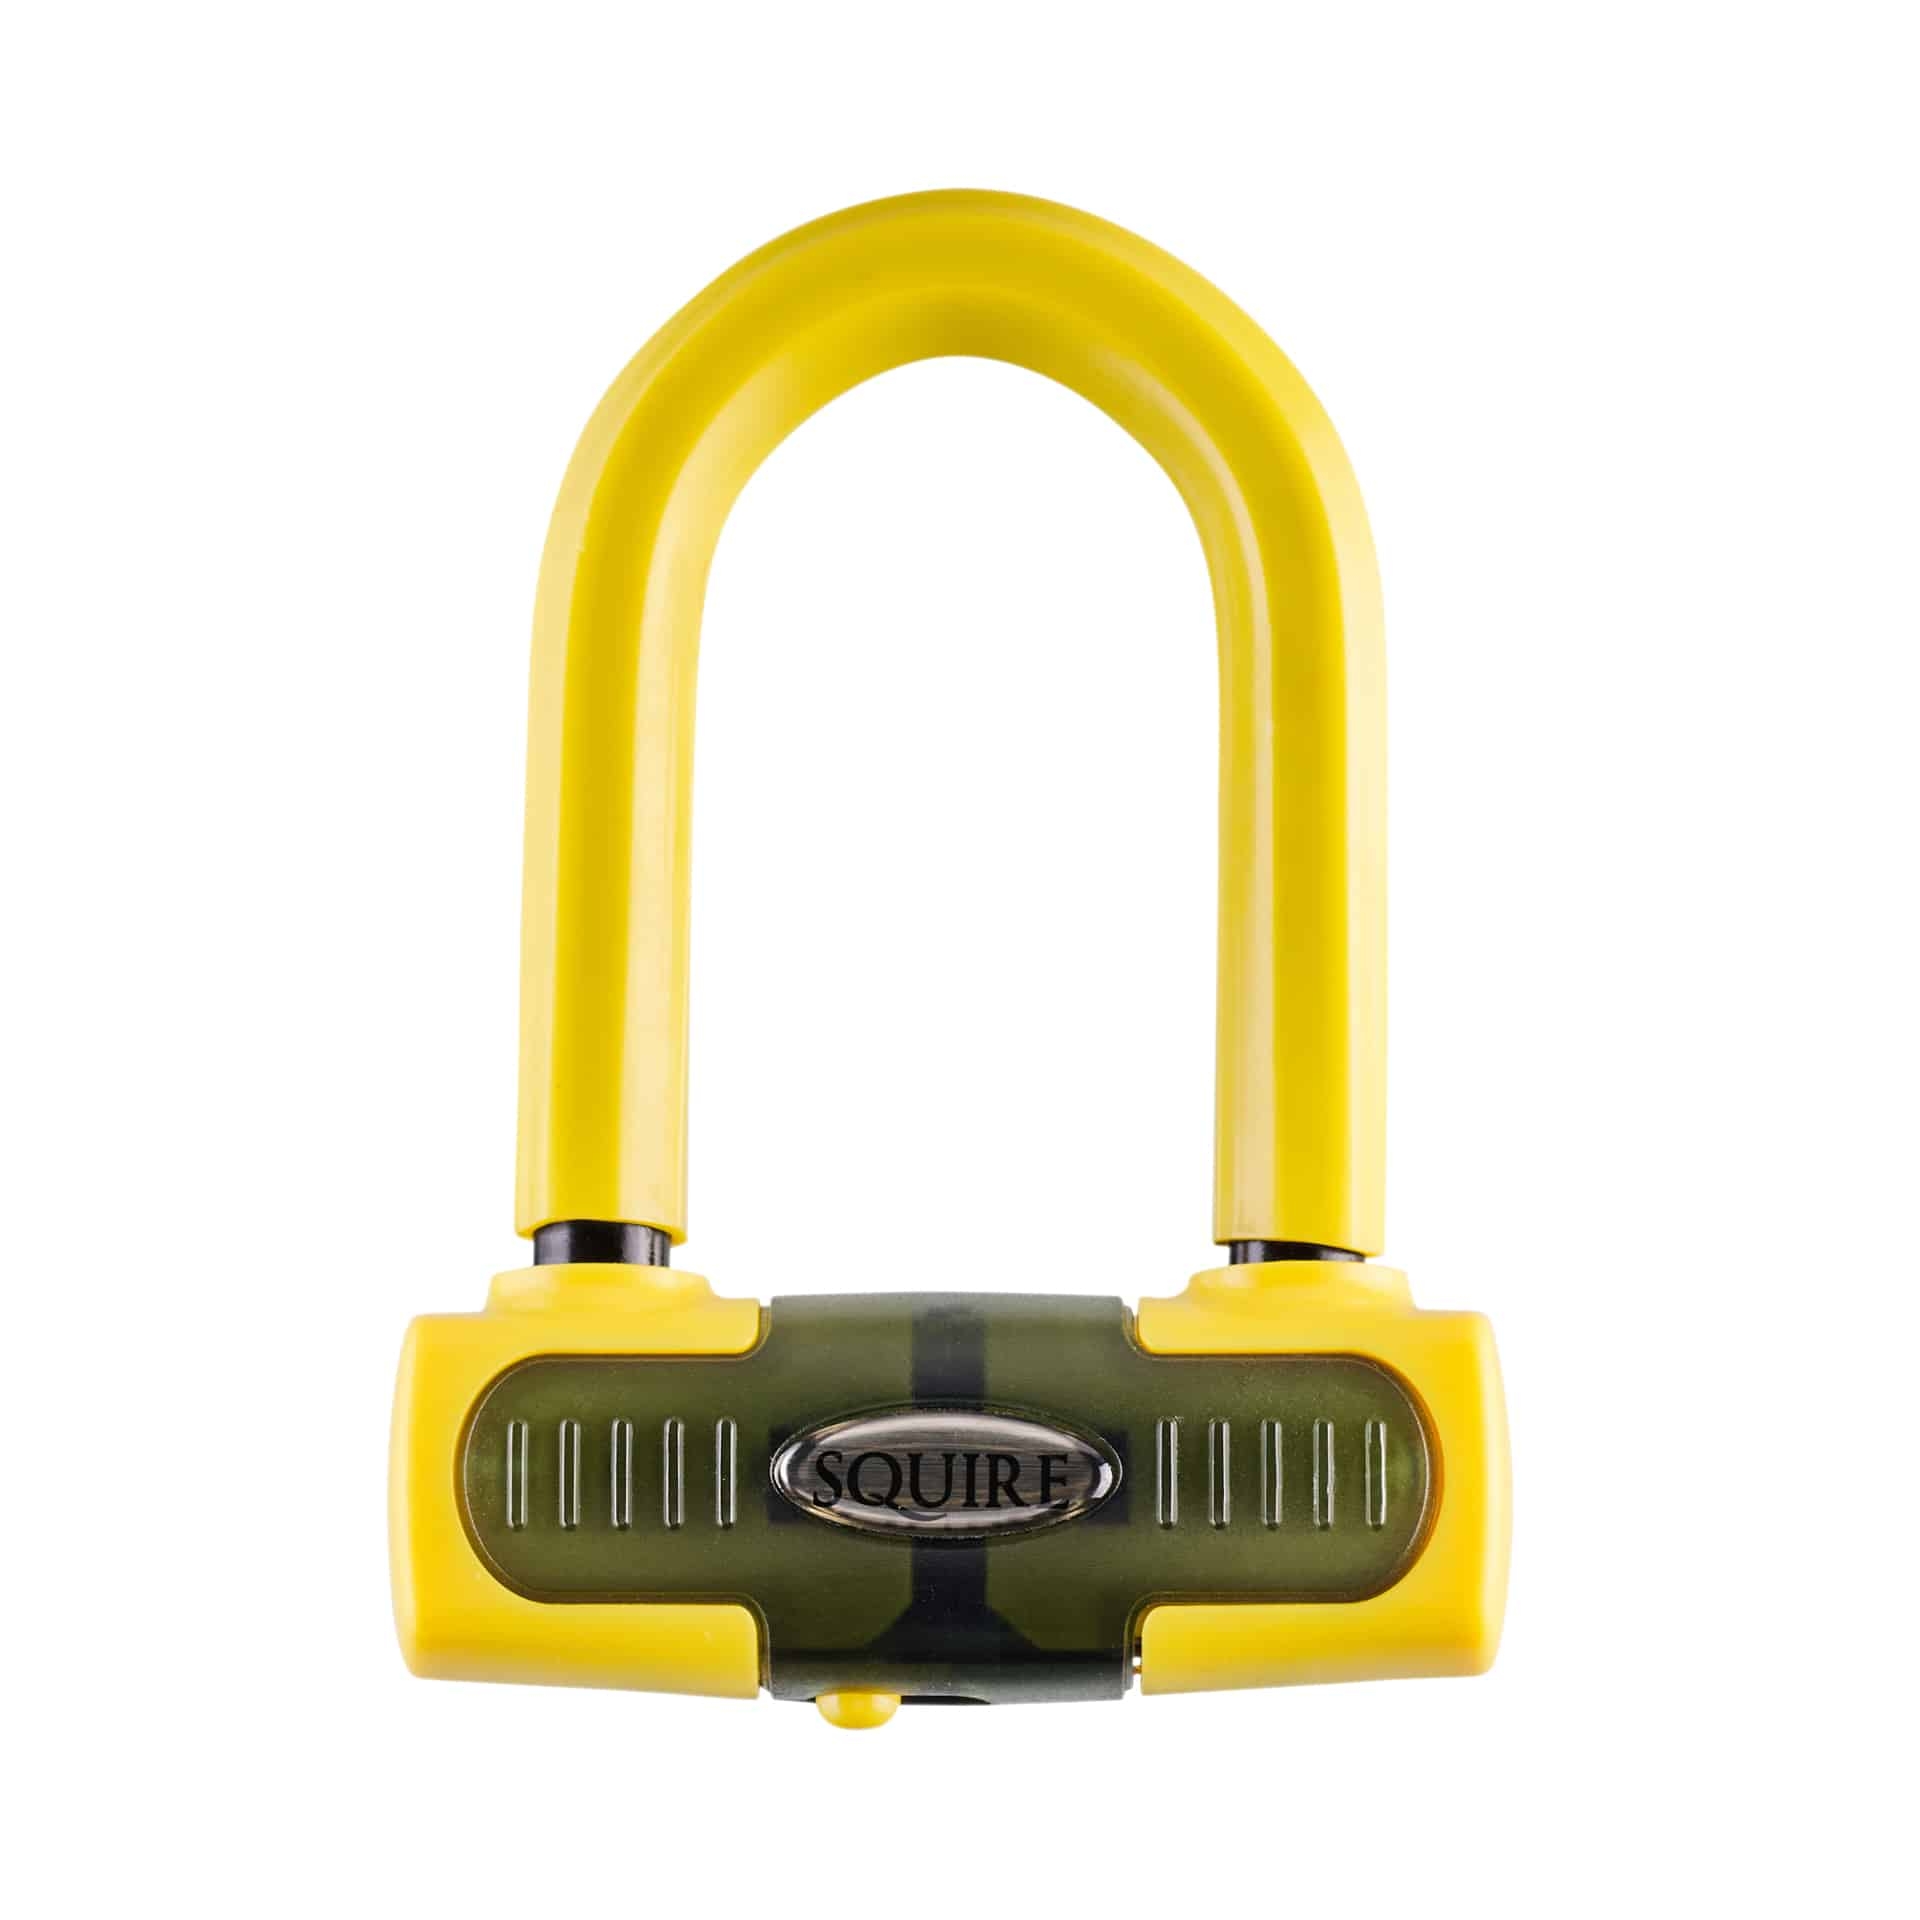 Squire Bicycle Lock EIGERMINI-YELLOW-A